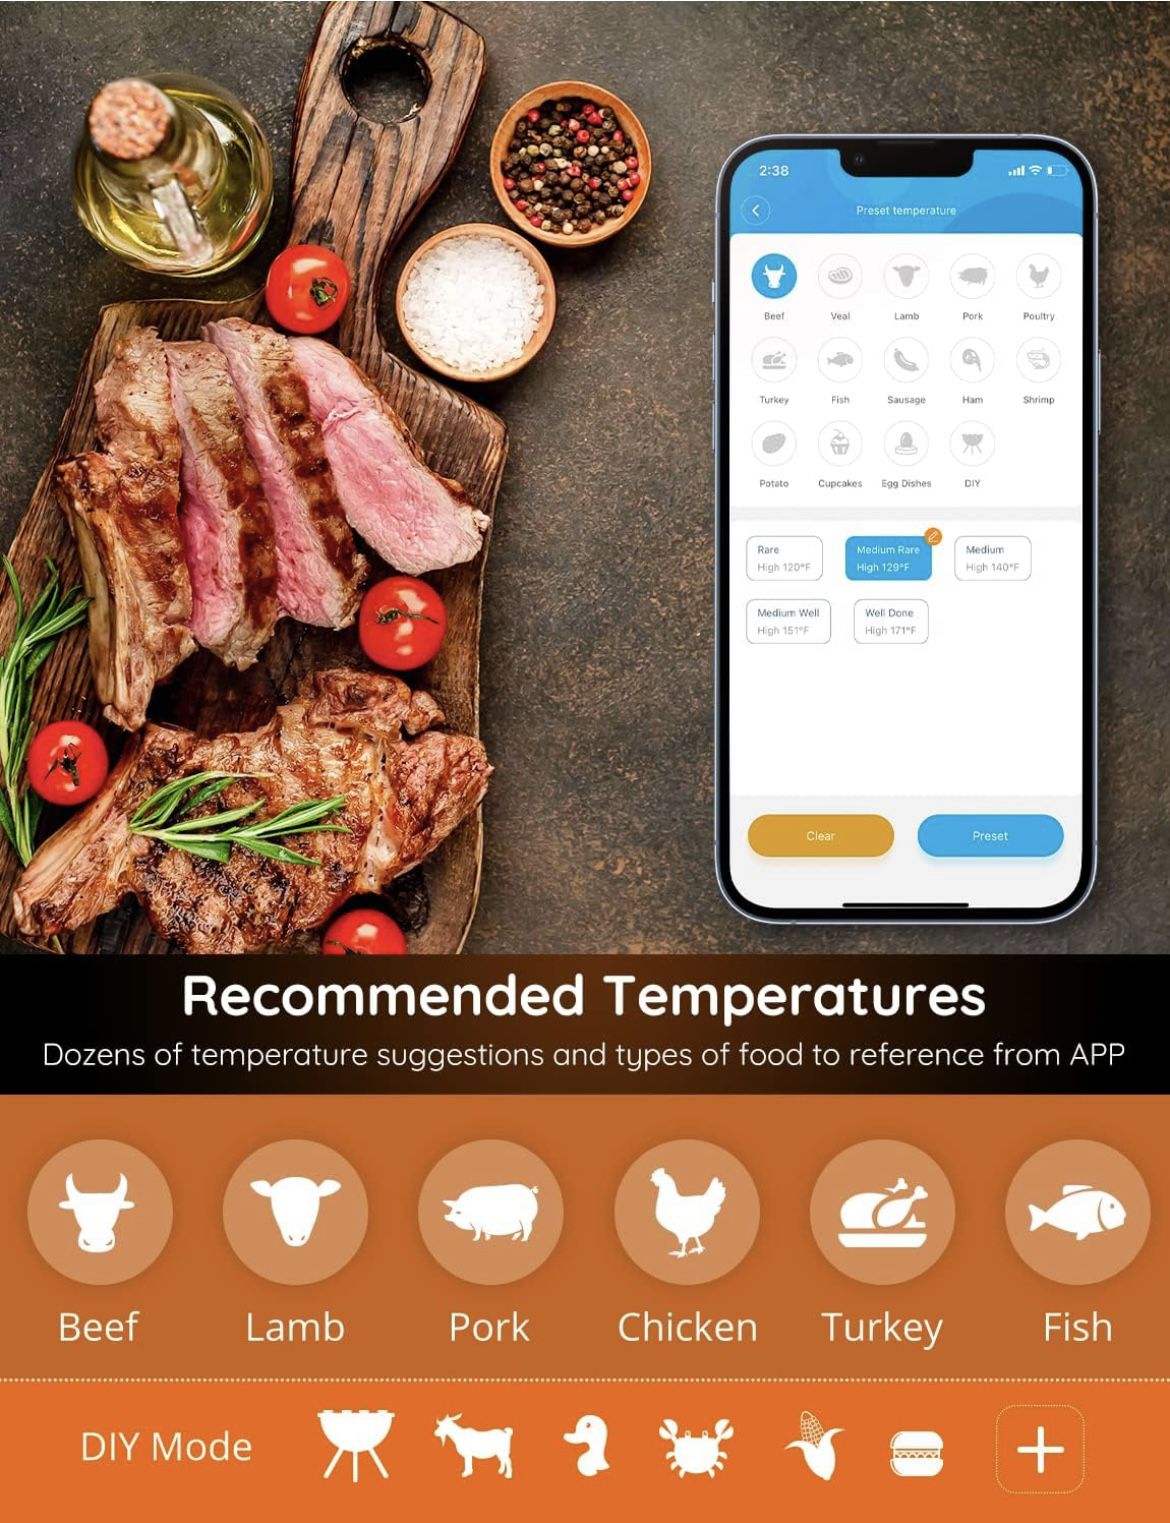 Govee Digital Bluetooth Smart Meat Thermometer Deals, Coupons 